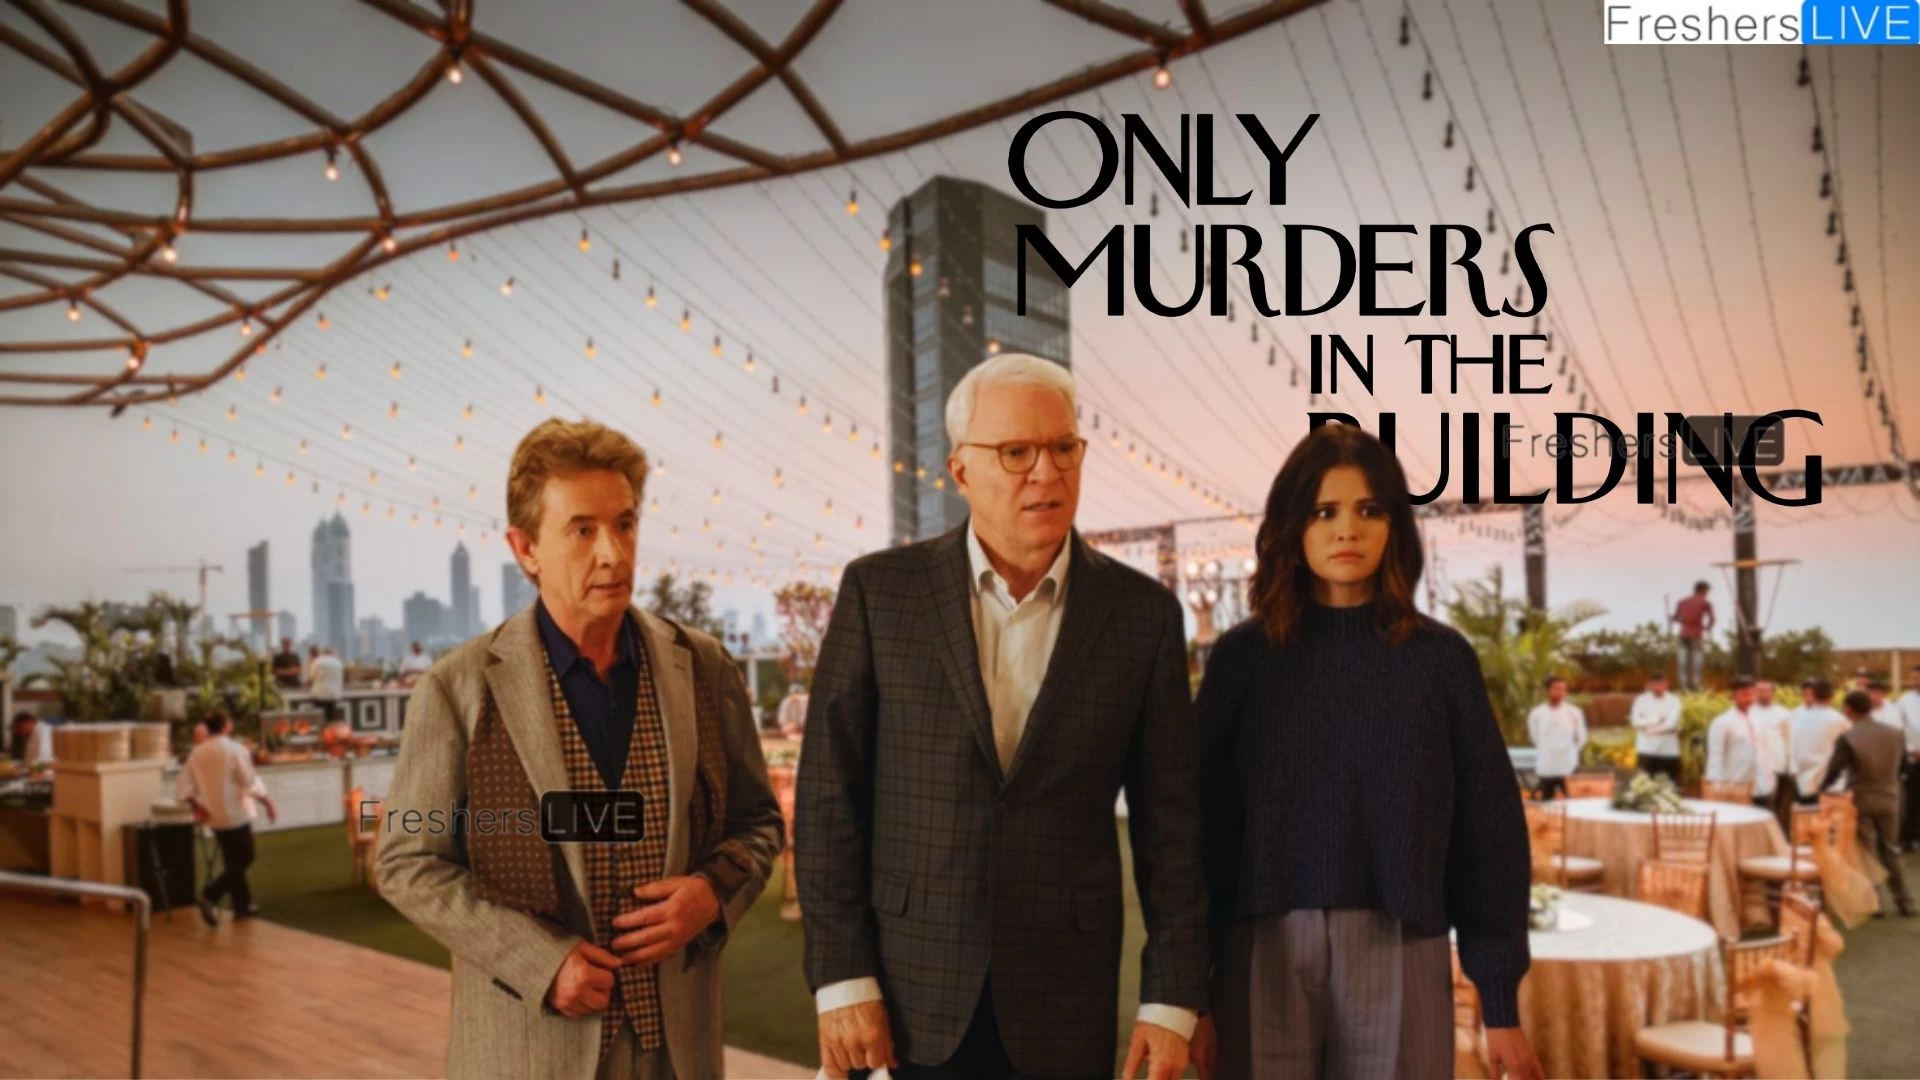 Only Murders in the Building Season 3 Episode 8 Ending Explained, Cast, Review, Trailer, and More